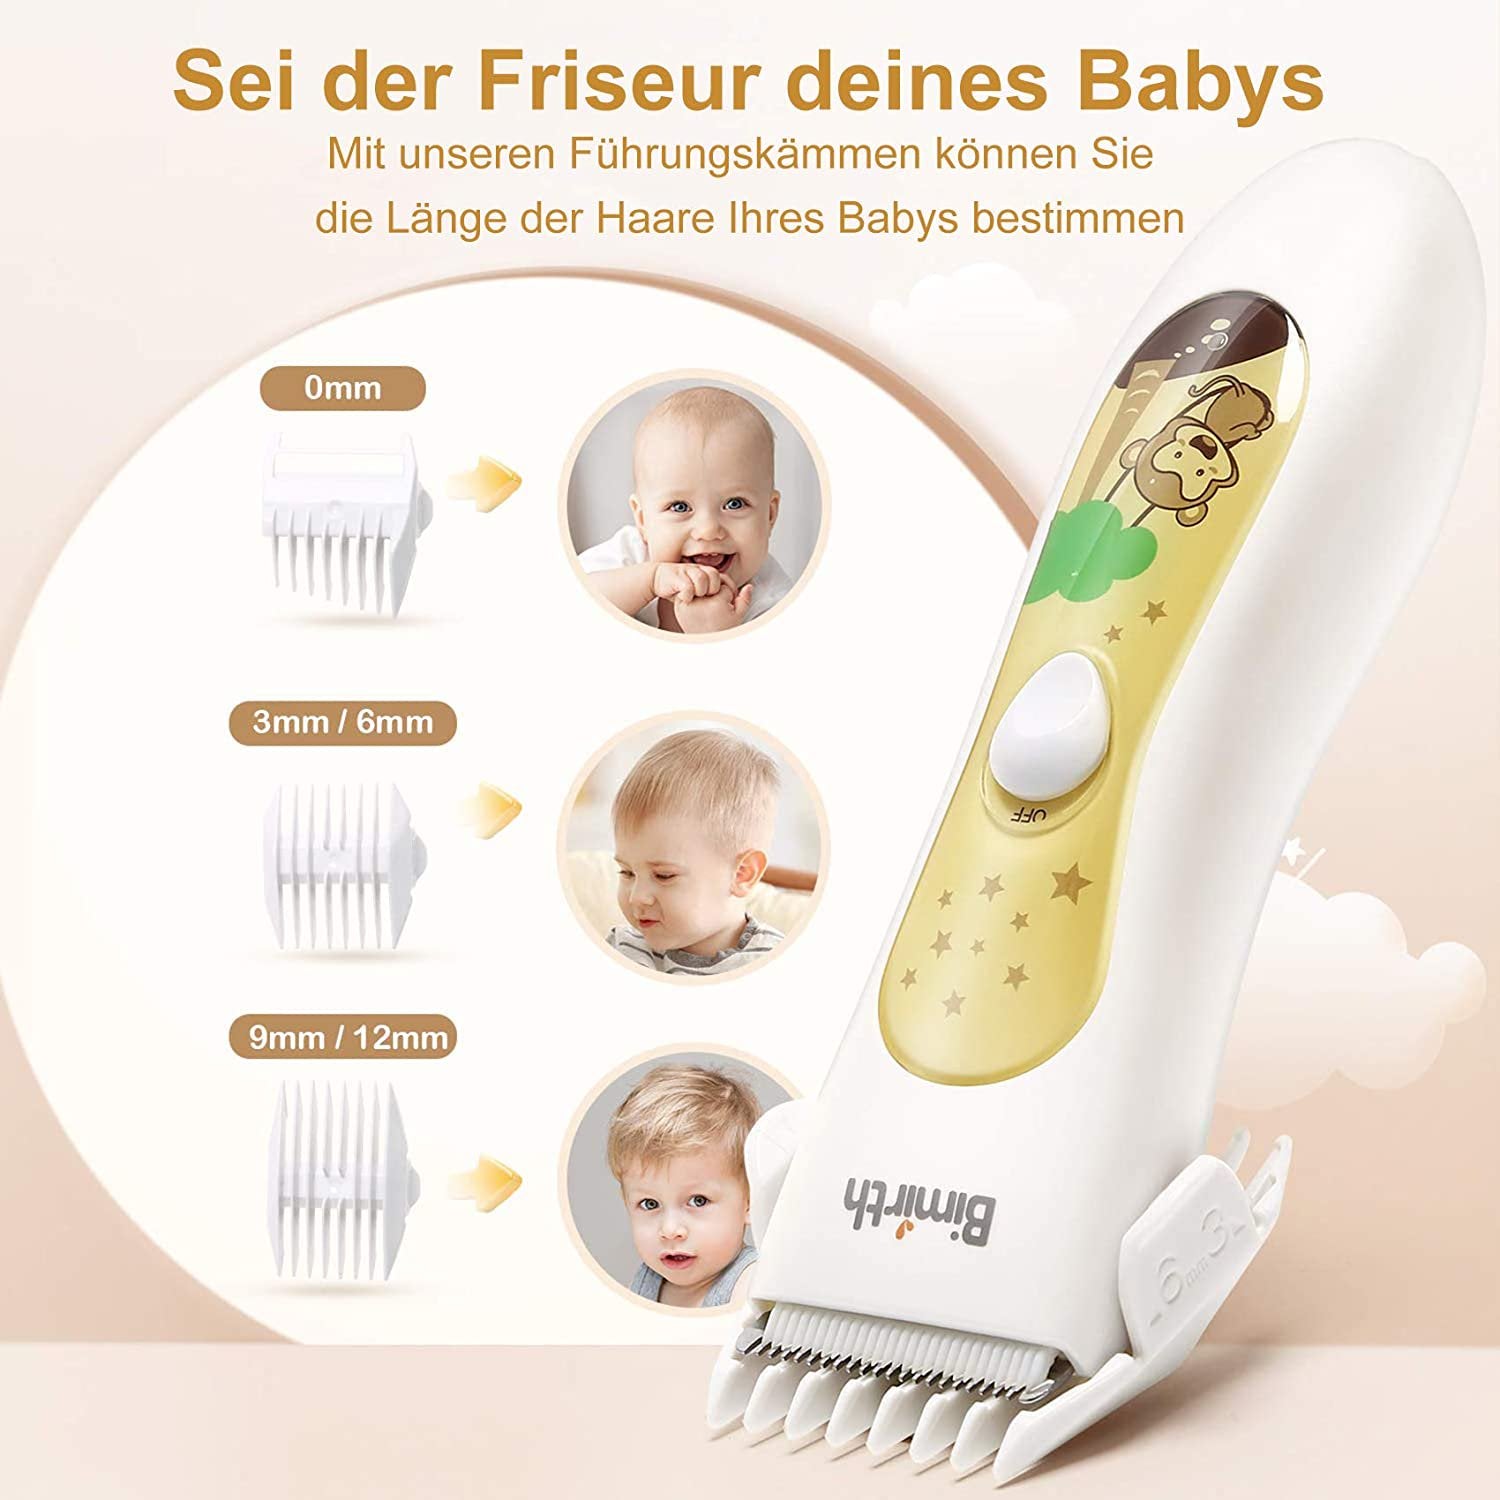 Kids Hair Clipper Electric Baby Hair Clipper Kits Waterproof Quiet Hair Trimmer Shaver for Babies Kids Toddler Boy Haircut Trimmer